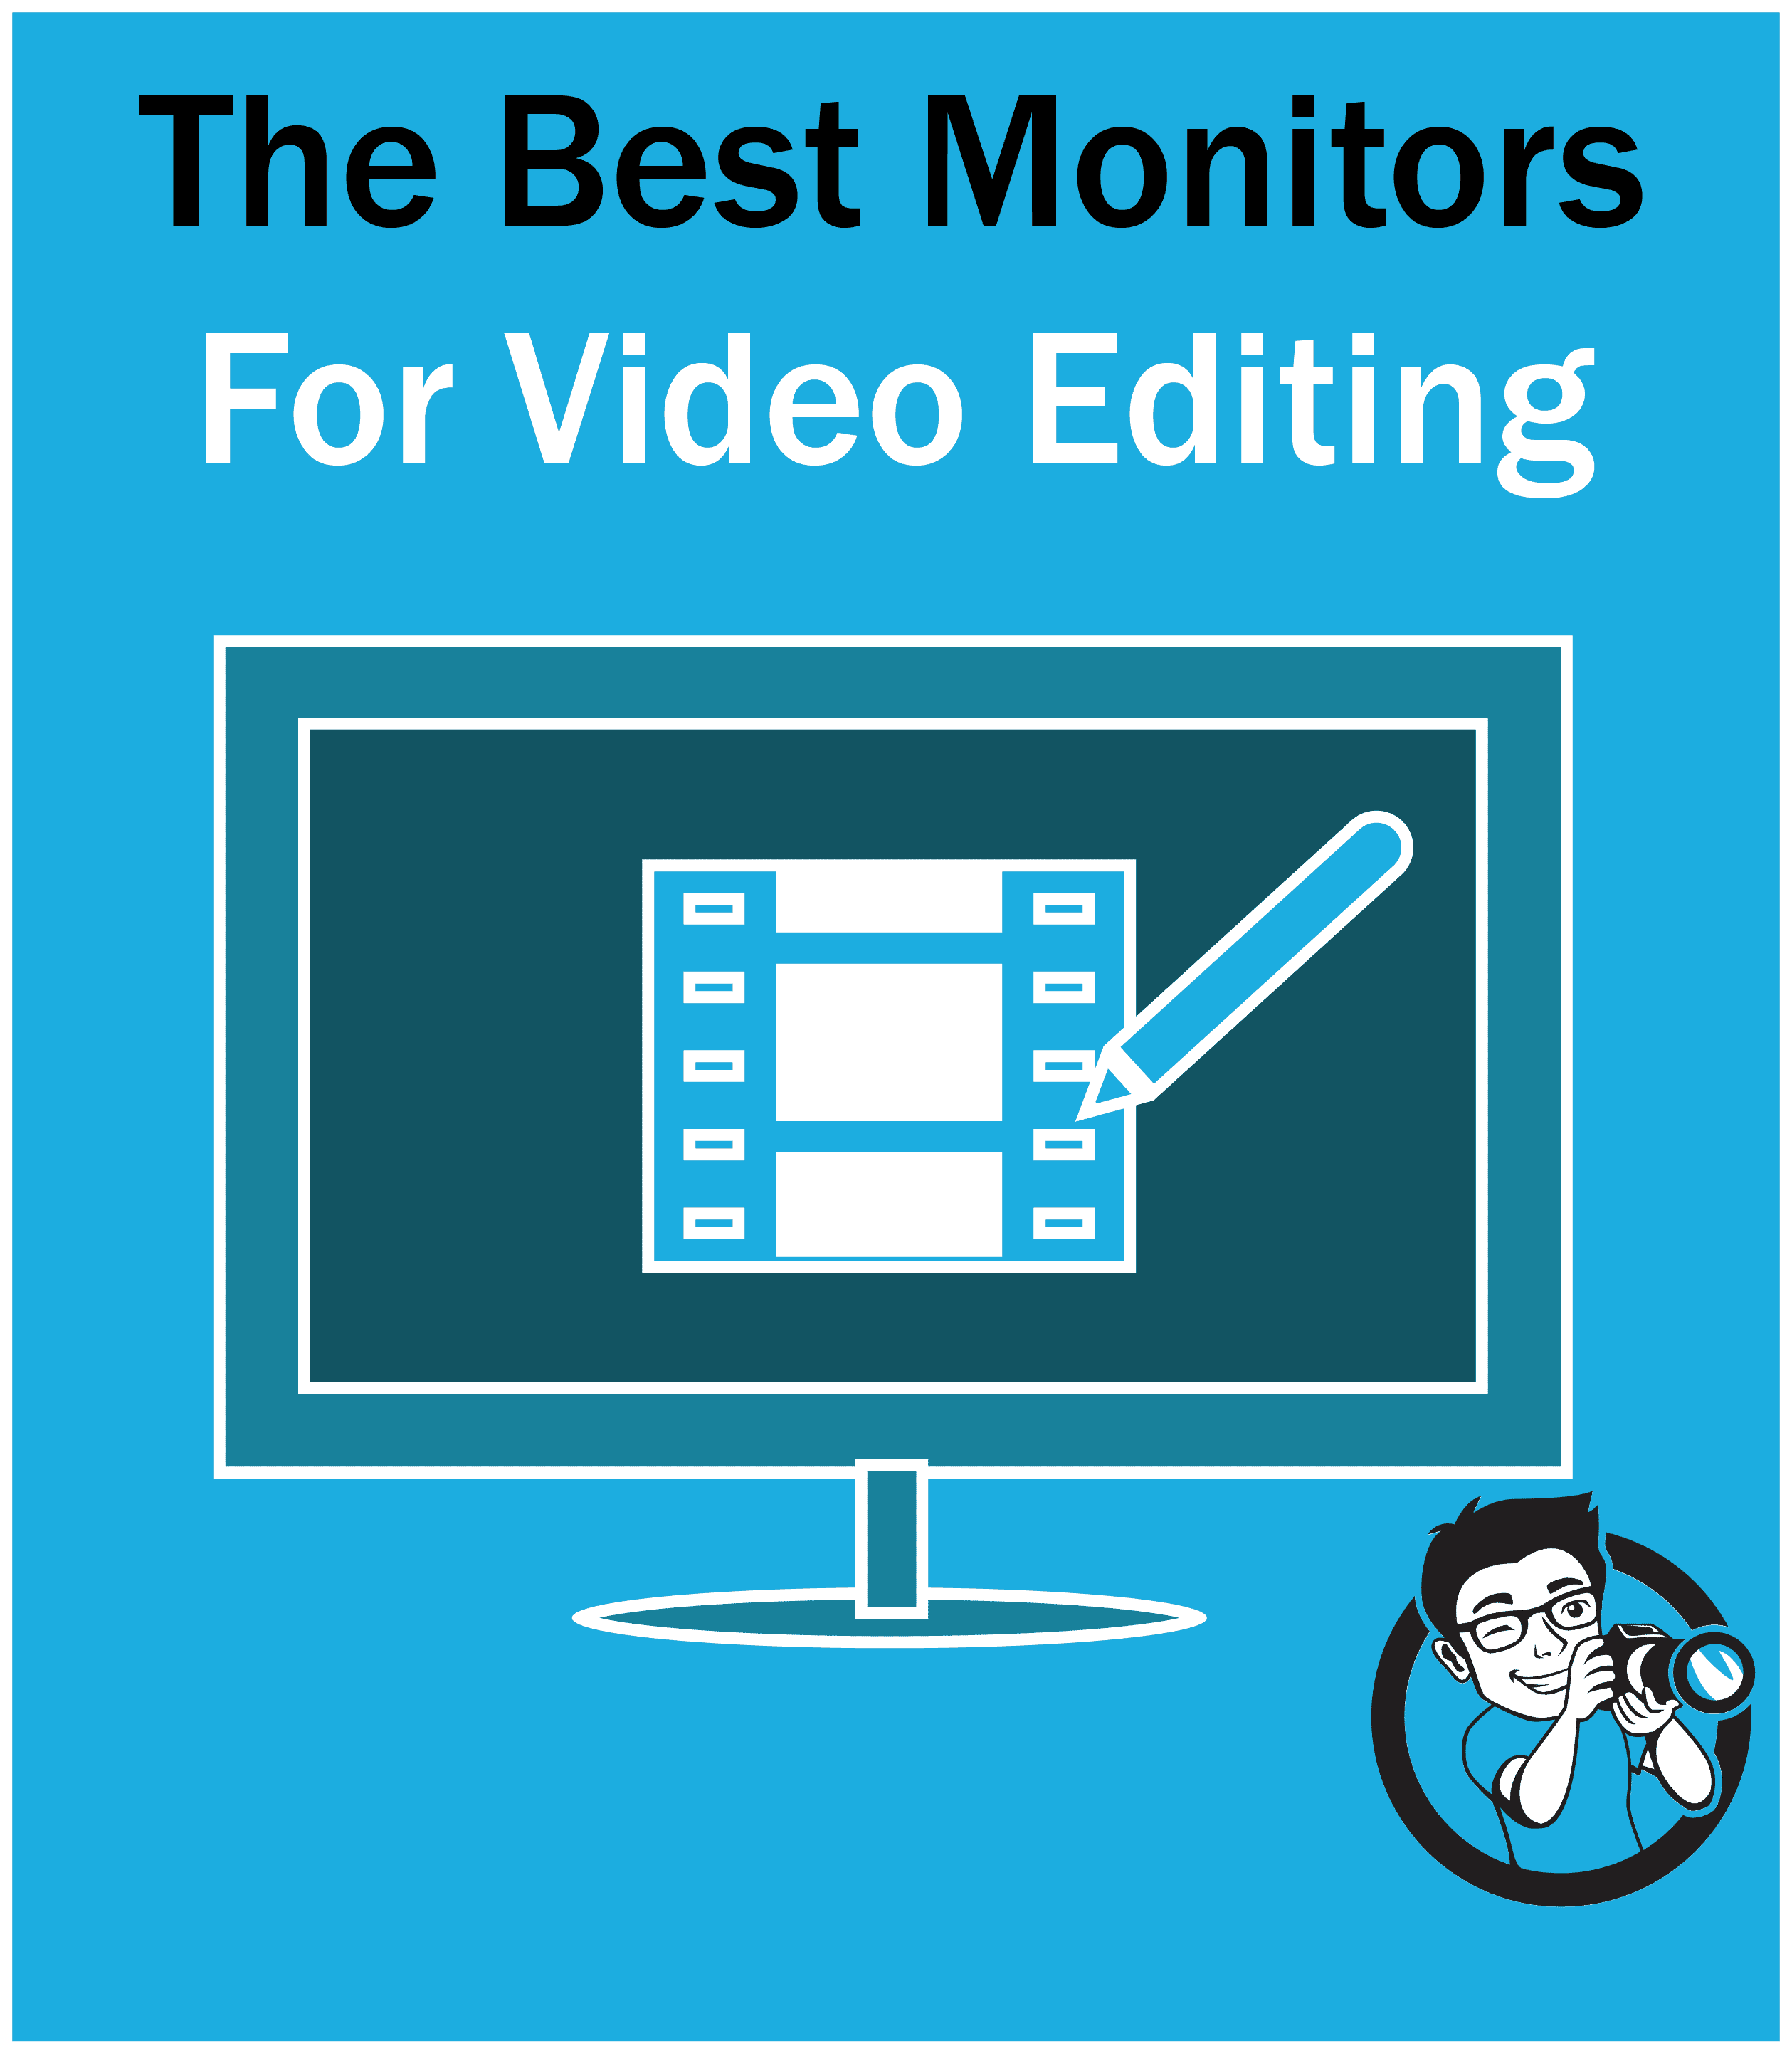 The Best Monitors for Video Editing Top Picks for All Skill Levels